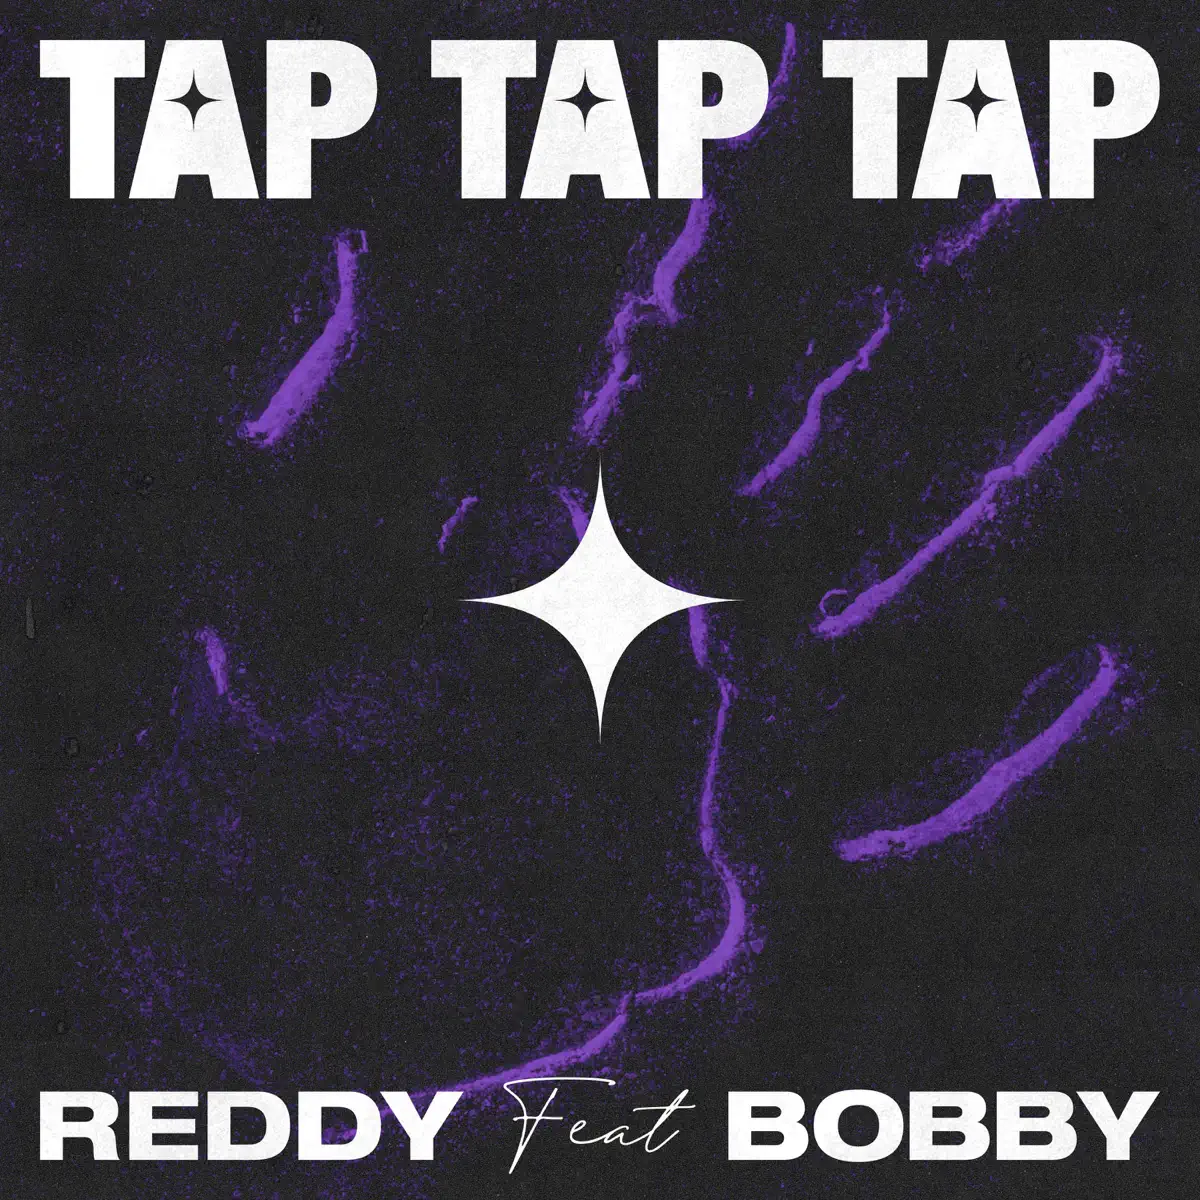 REDDY - Tap Tap Tap (feat. BOBBY) - Single (2023) [iTunes Plus AAC M4A]-新房子